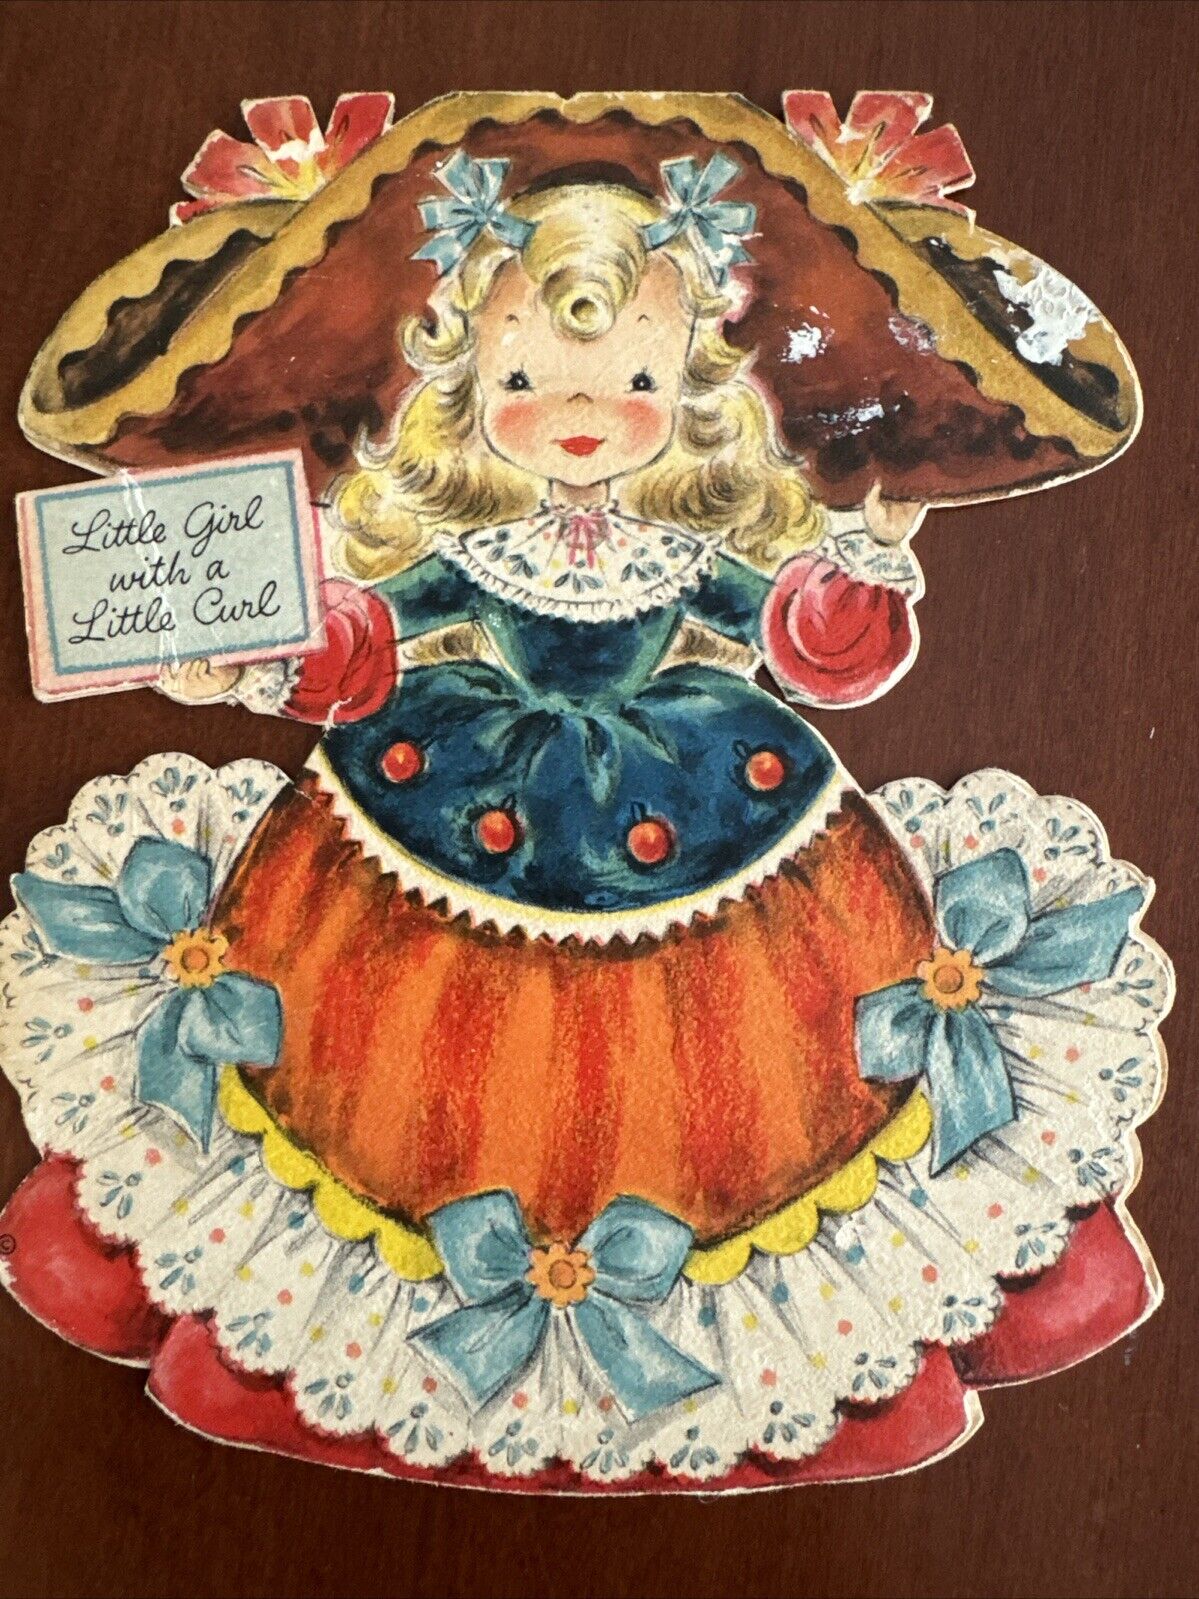 Vtg Hallmark Card Little Girl With A Curl Land Of Make Believe Doll No. 10 1948